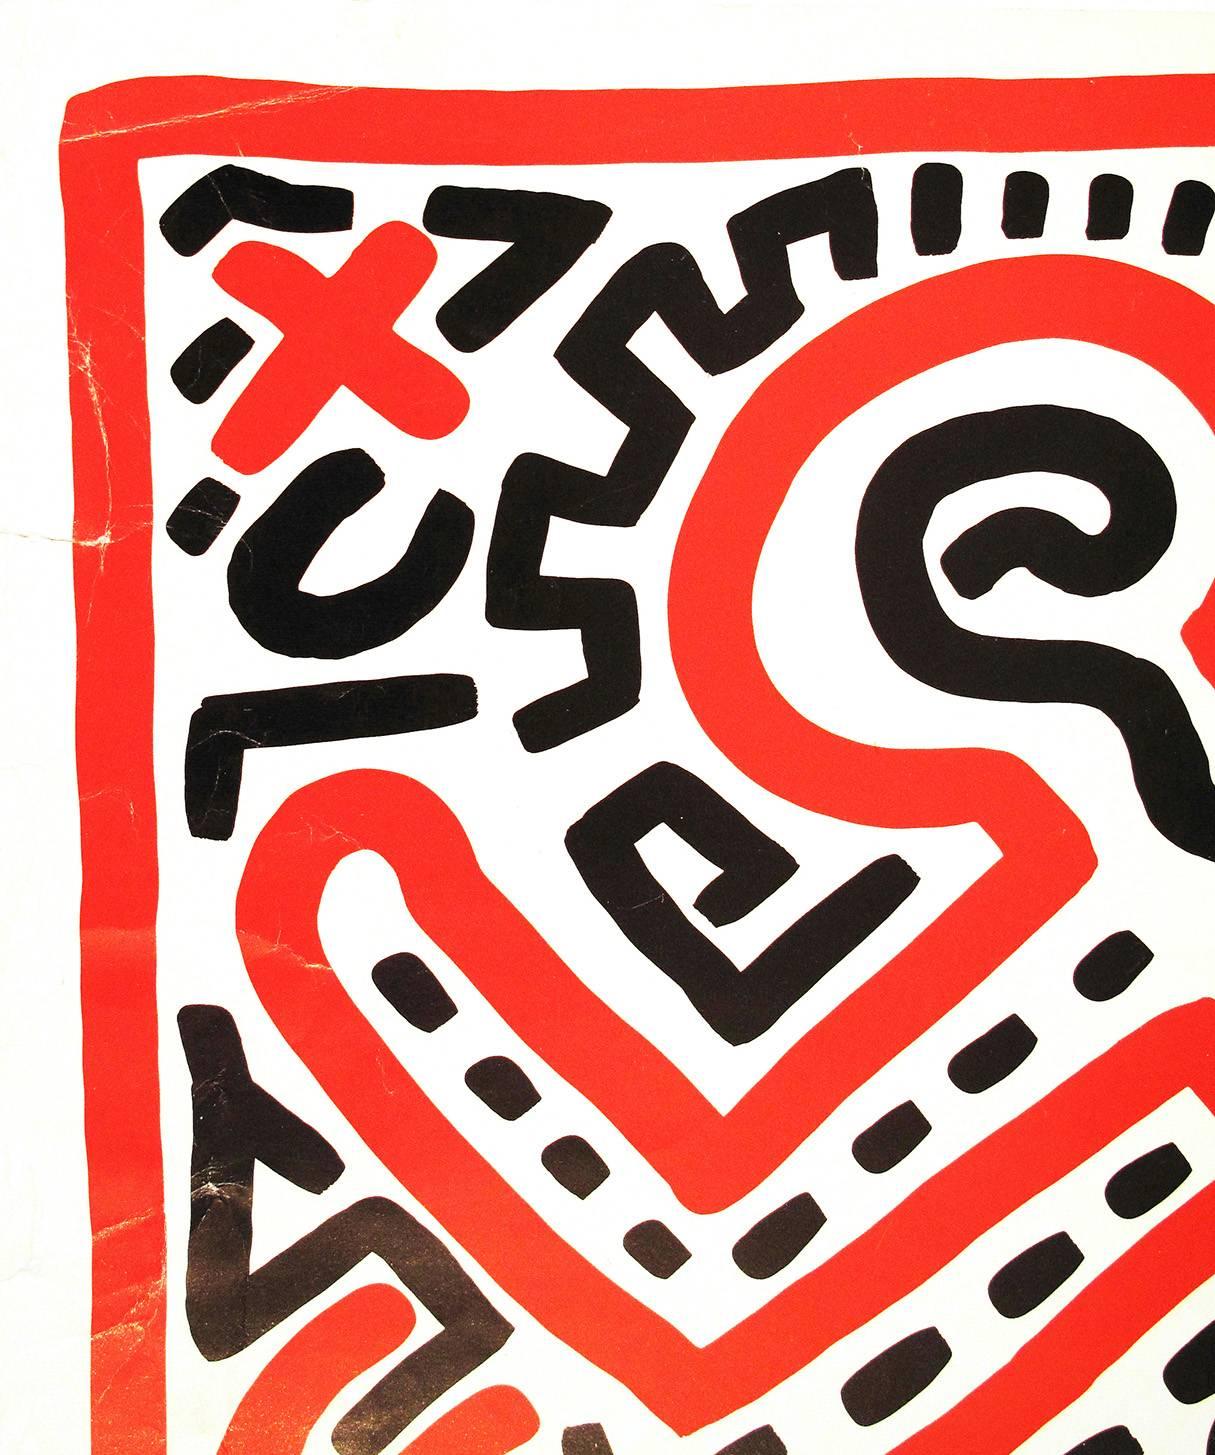 Fun Gallery Exhibition Poster - Print by Keith Haring